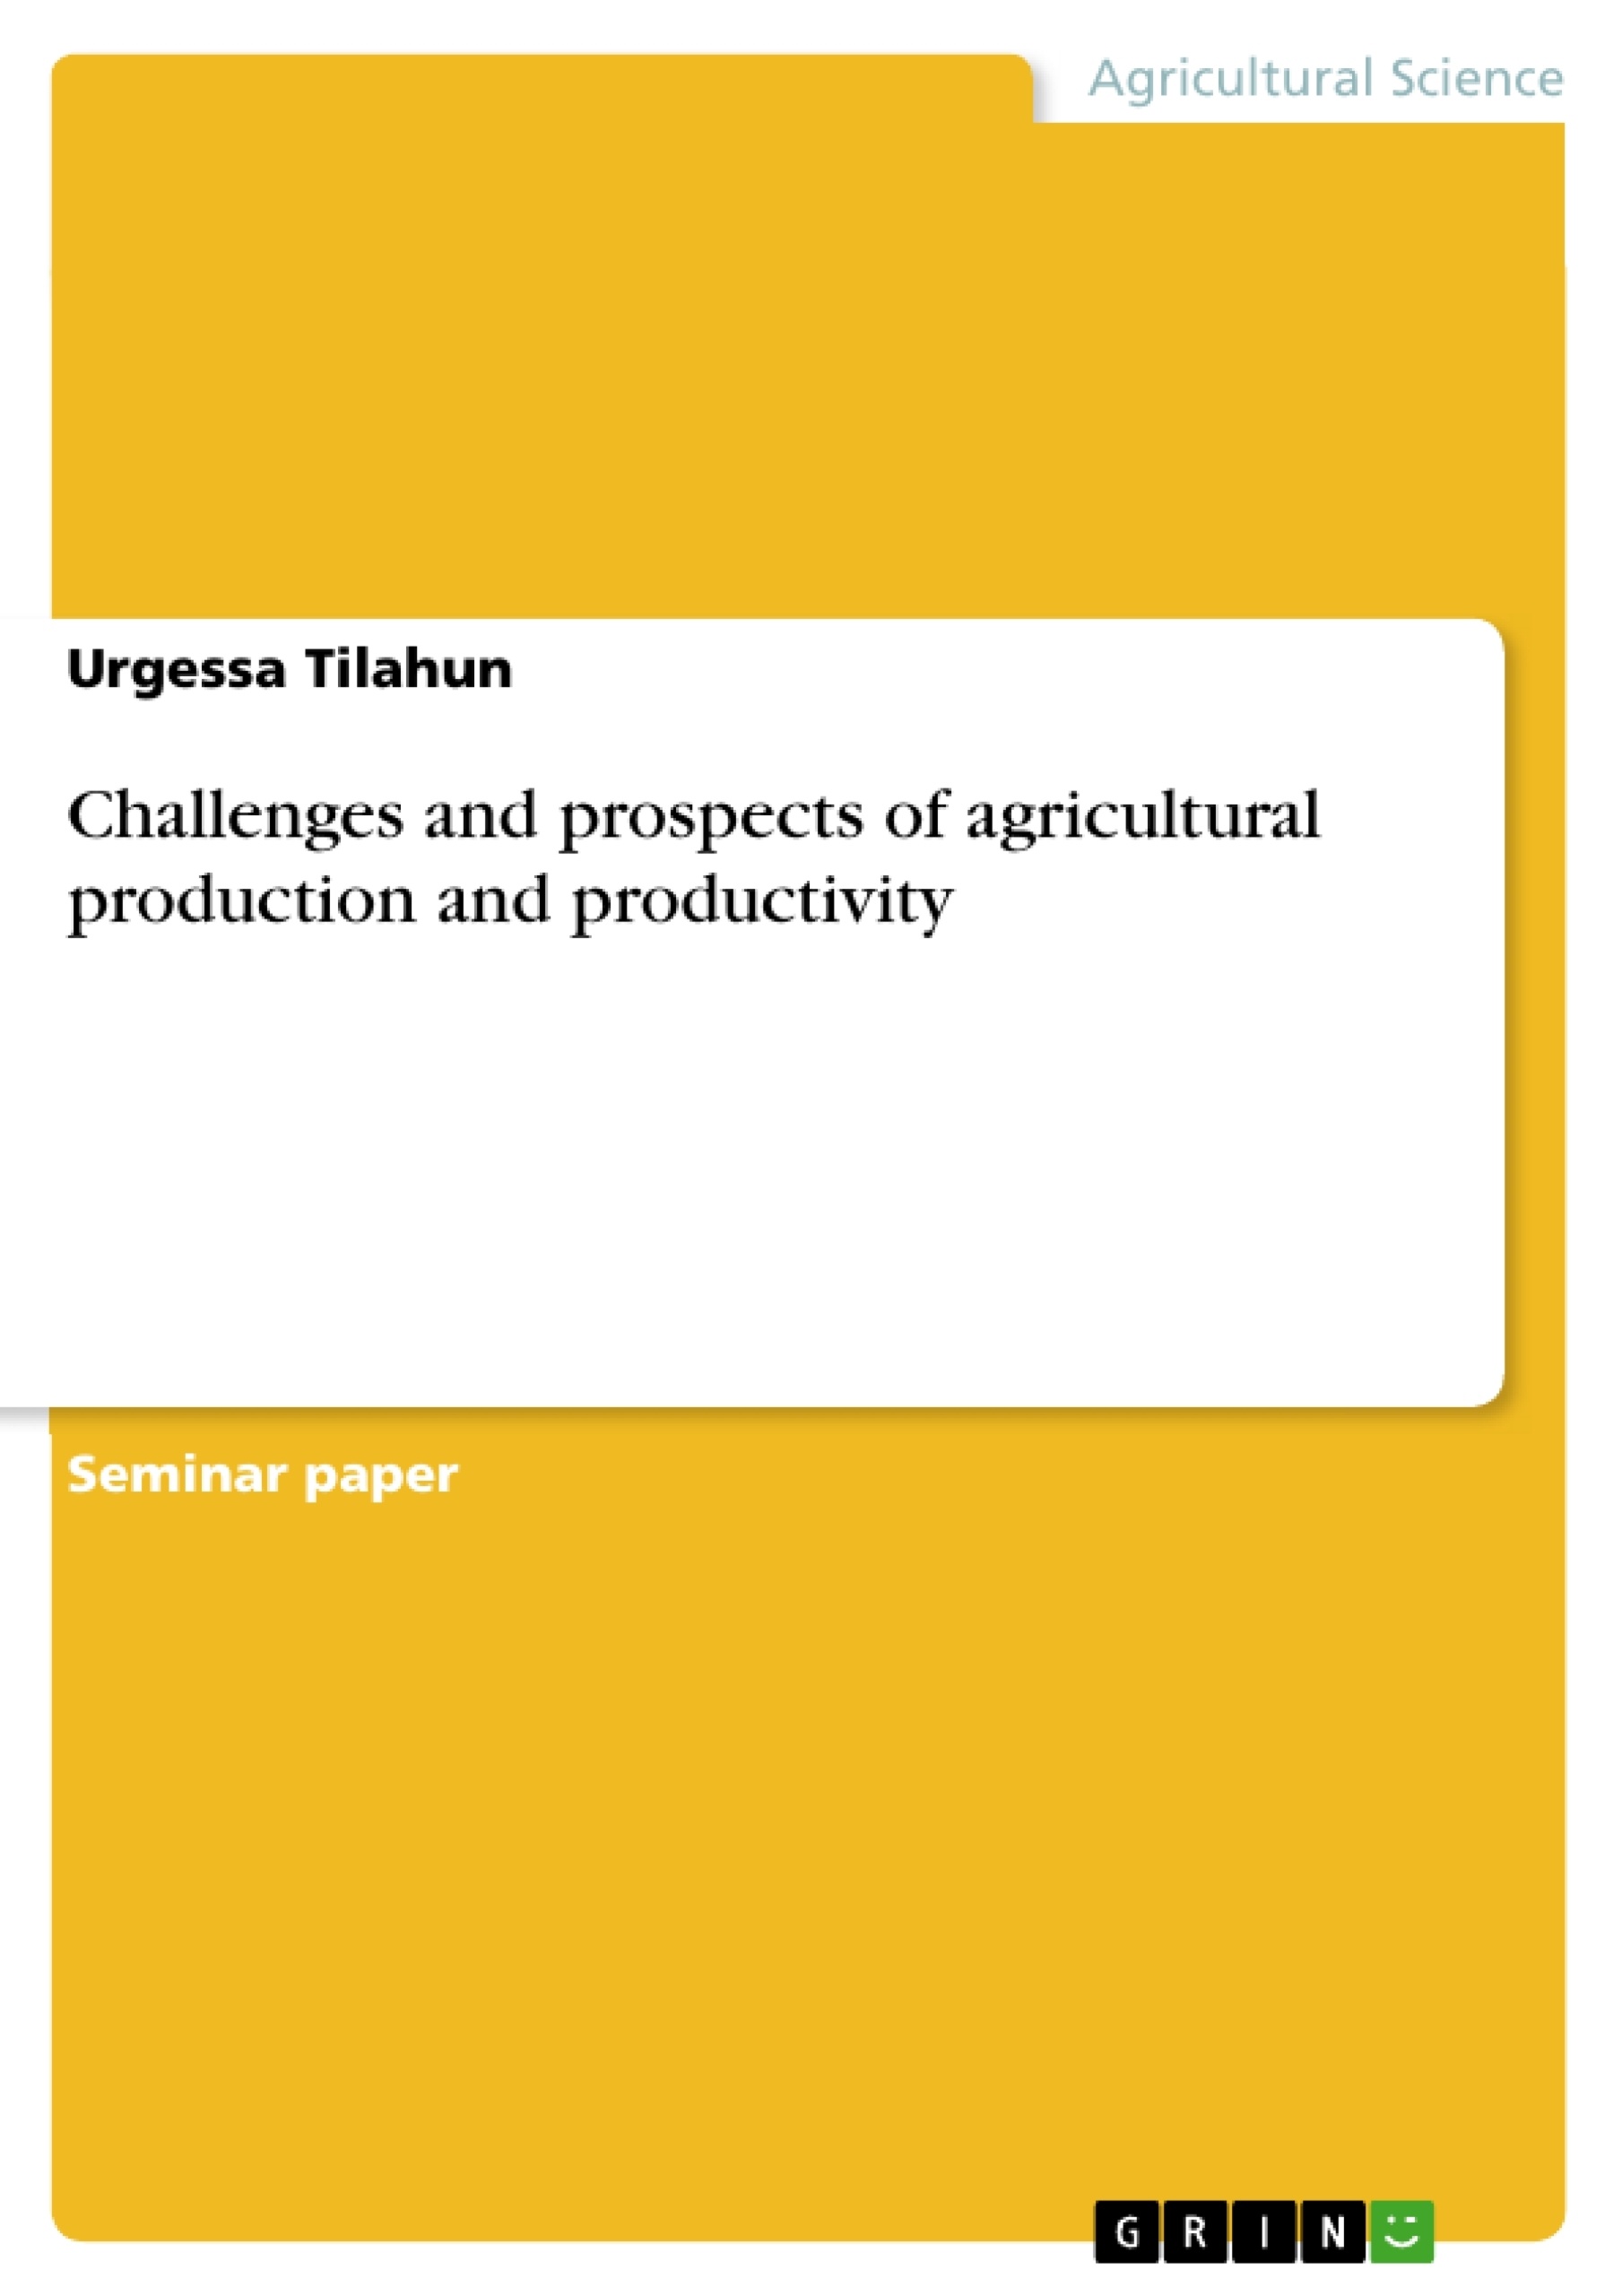 Titre: Challenges and prospects of agricultural production and productivity